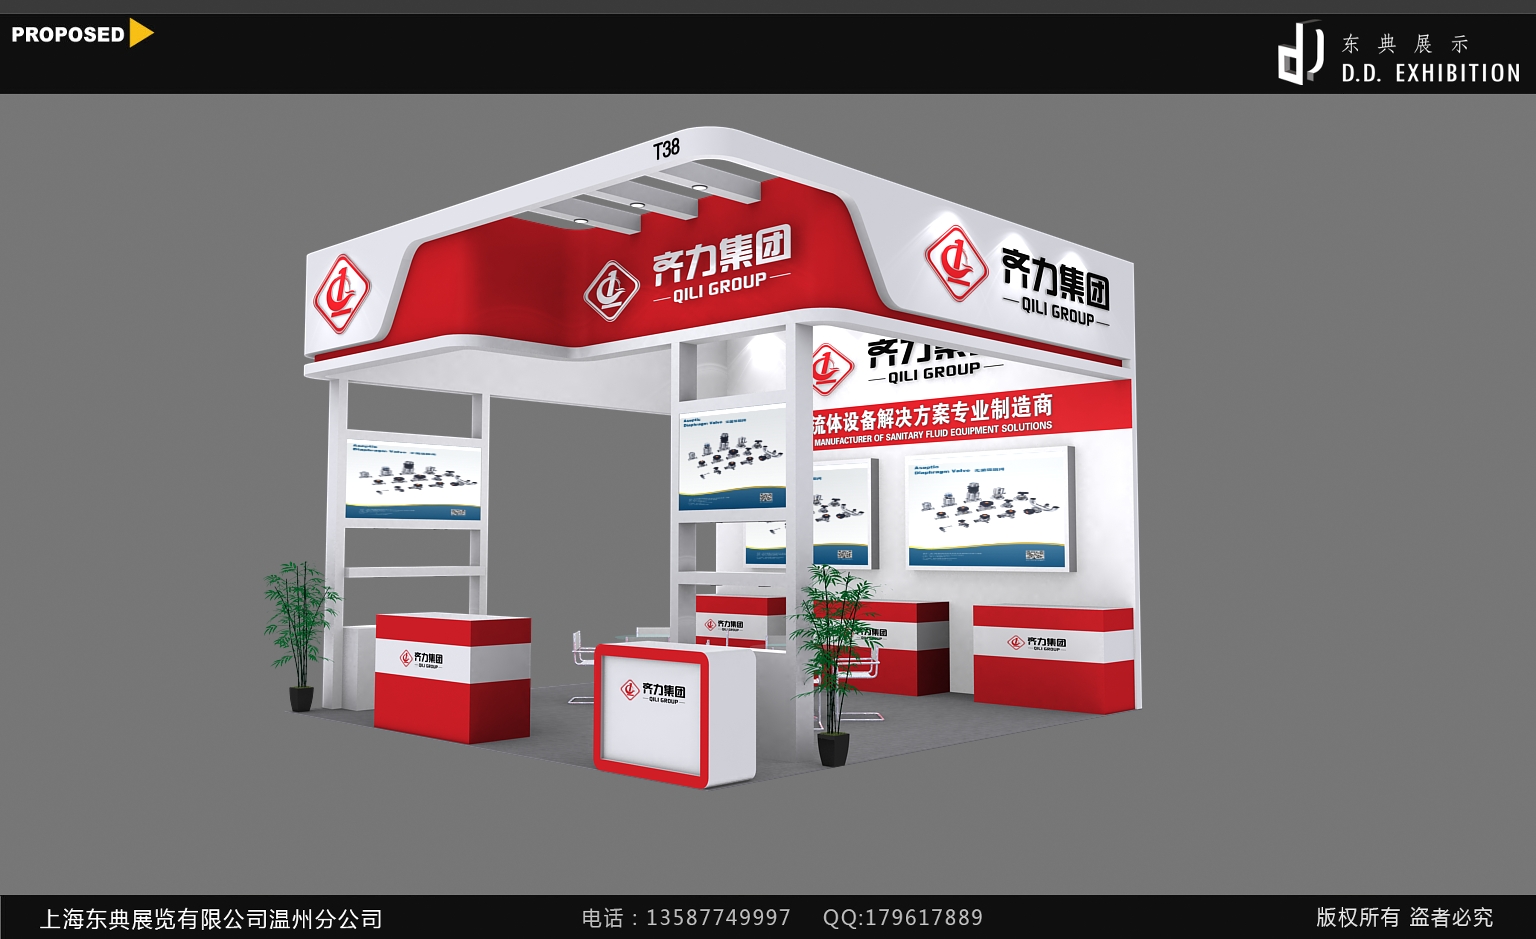 QILI will be attending 2024 CHINA WUXI BIO-PHARMACEUTICAL INDUSTRIAL EXHIBITION